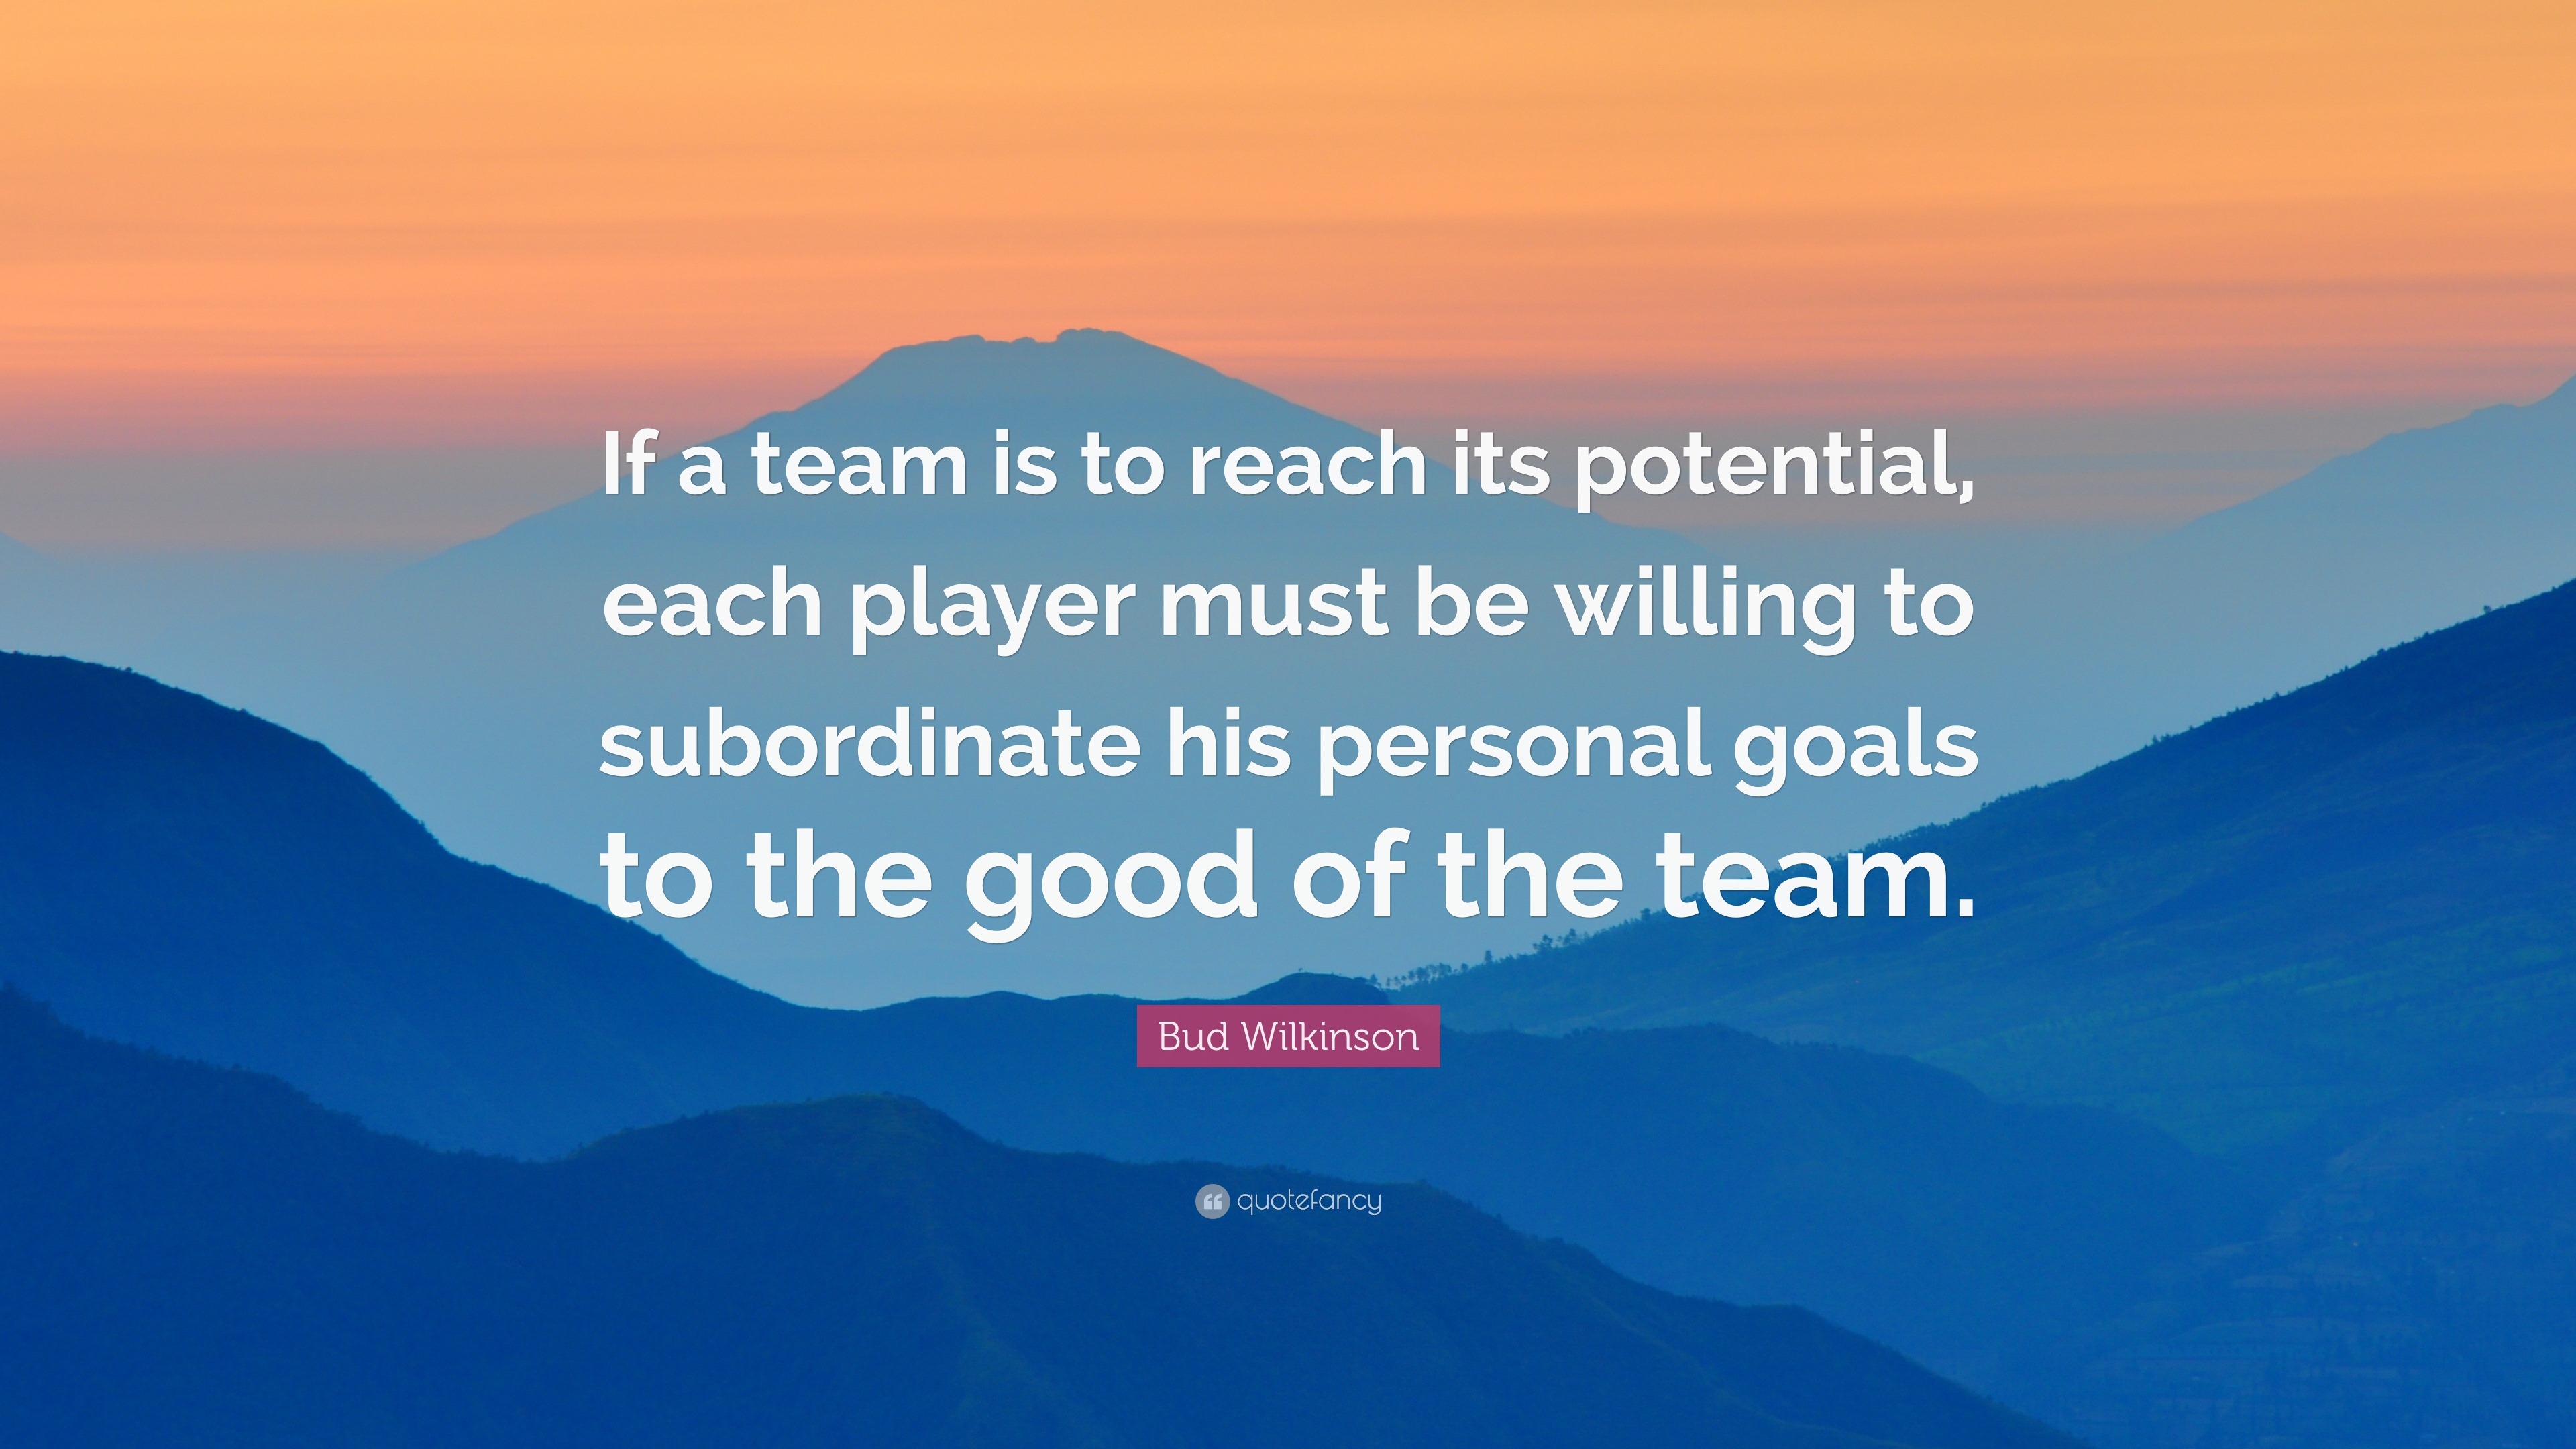 Bud Wilkinson Quote: “If a team is to reach its potential, each player ...